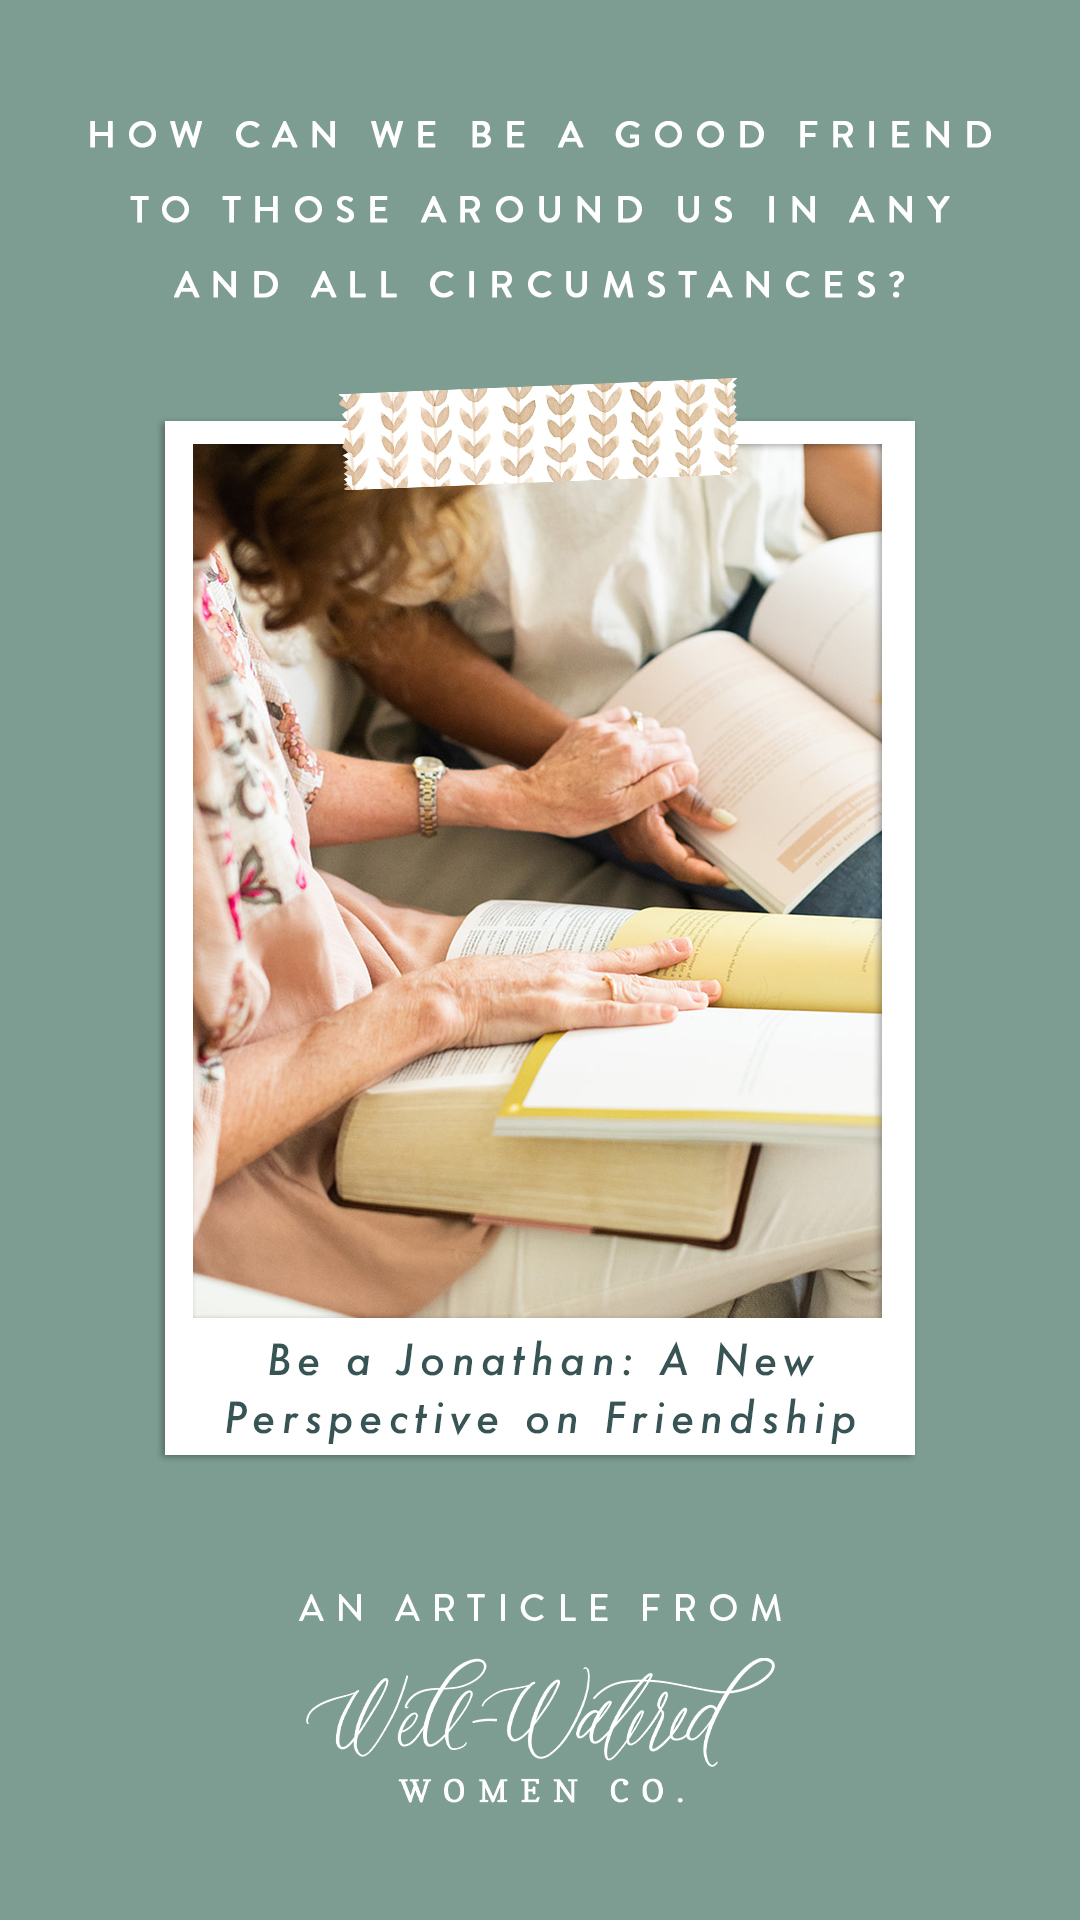 Be a Jonathan - a New Perspective on Friendship - An Article by Well-Watered Women